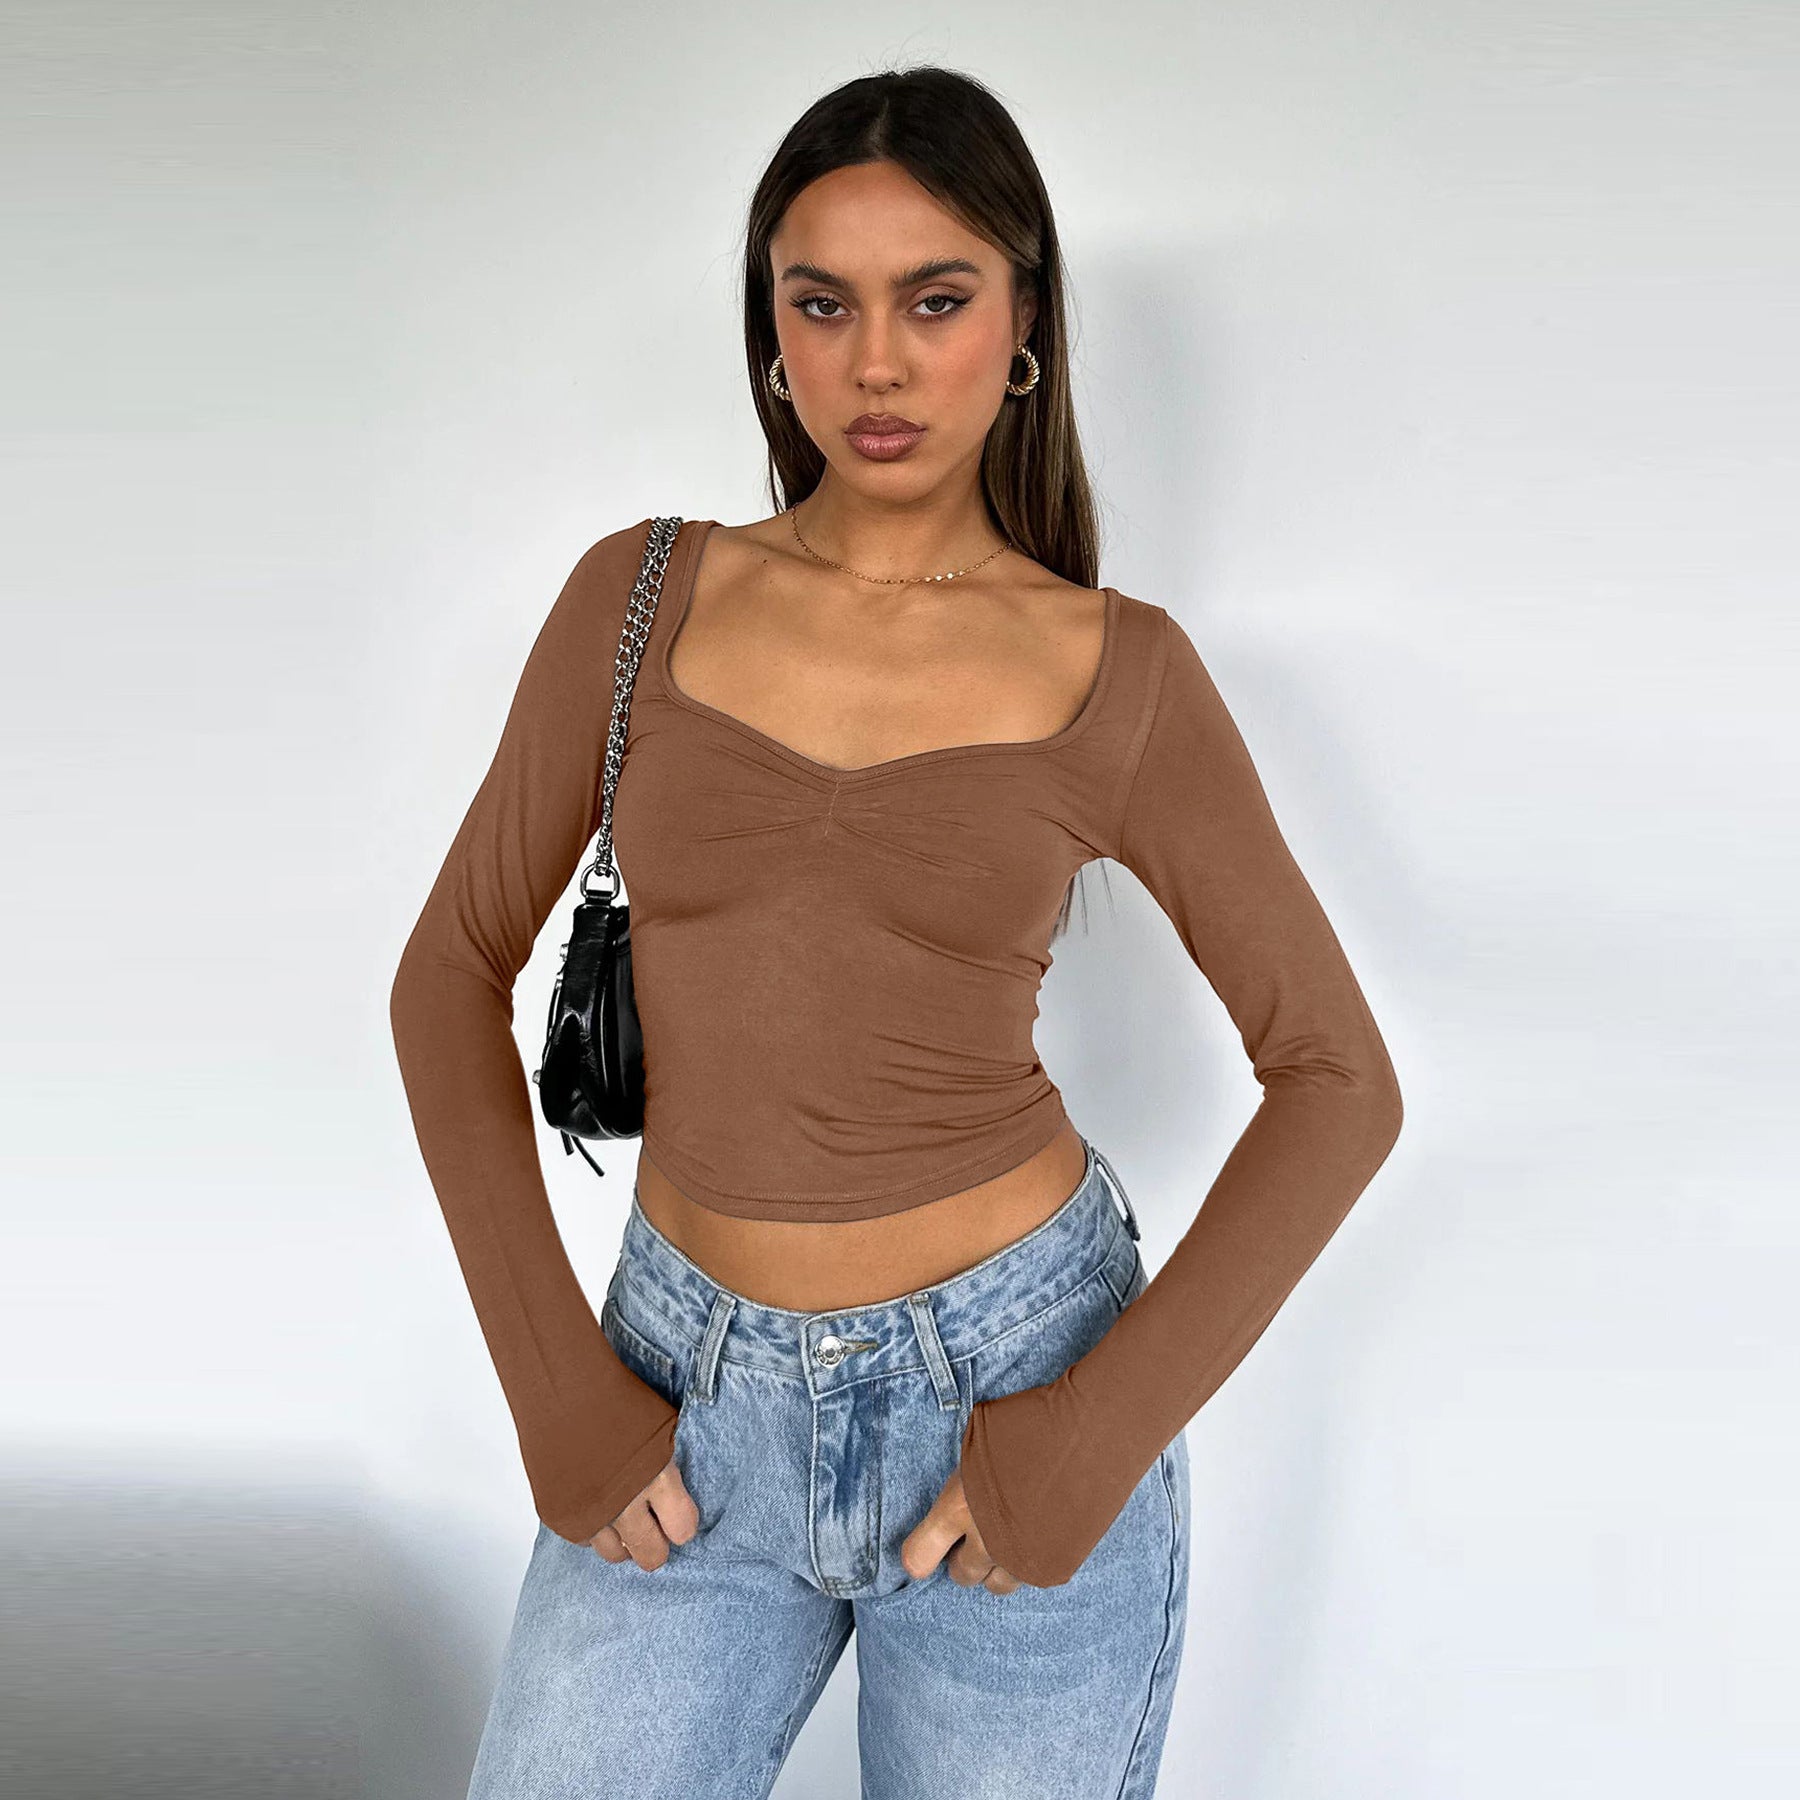 Women's T-shirt Autumn Solid Color Long-sleeved Hot Blouses